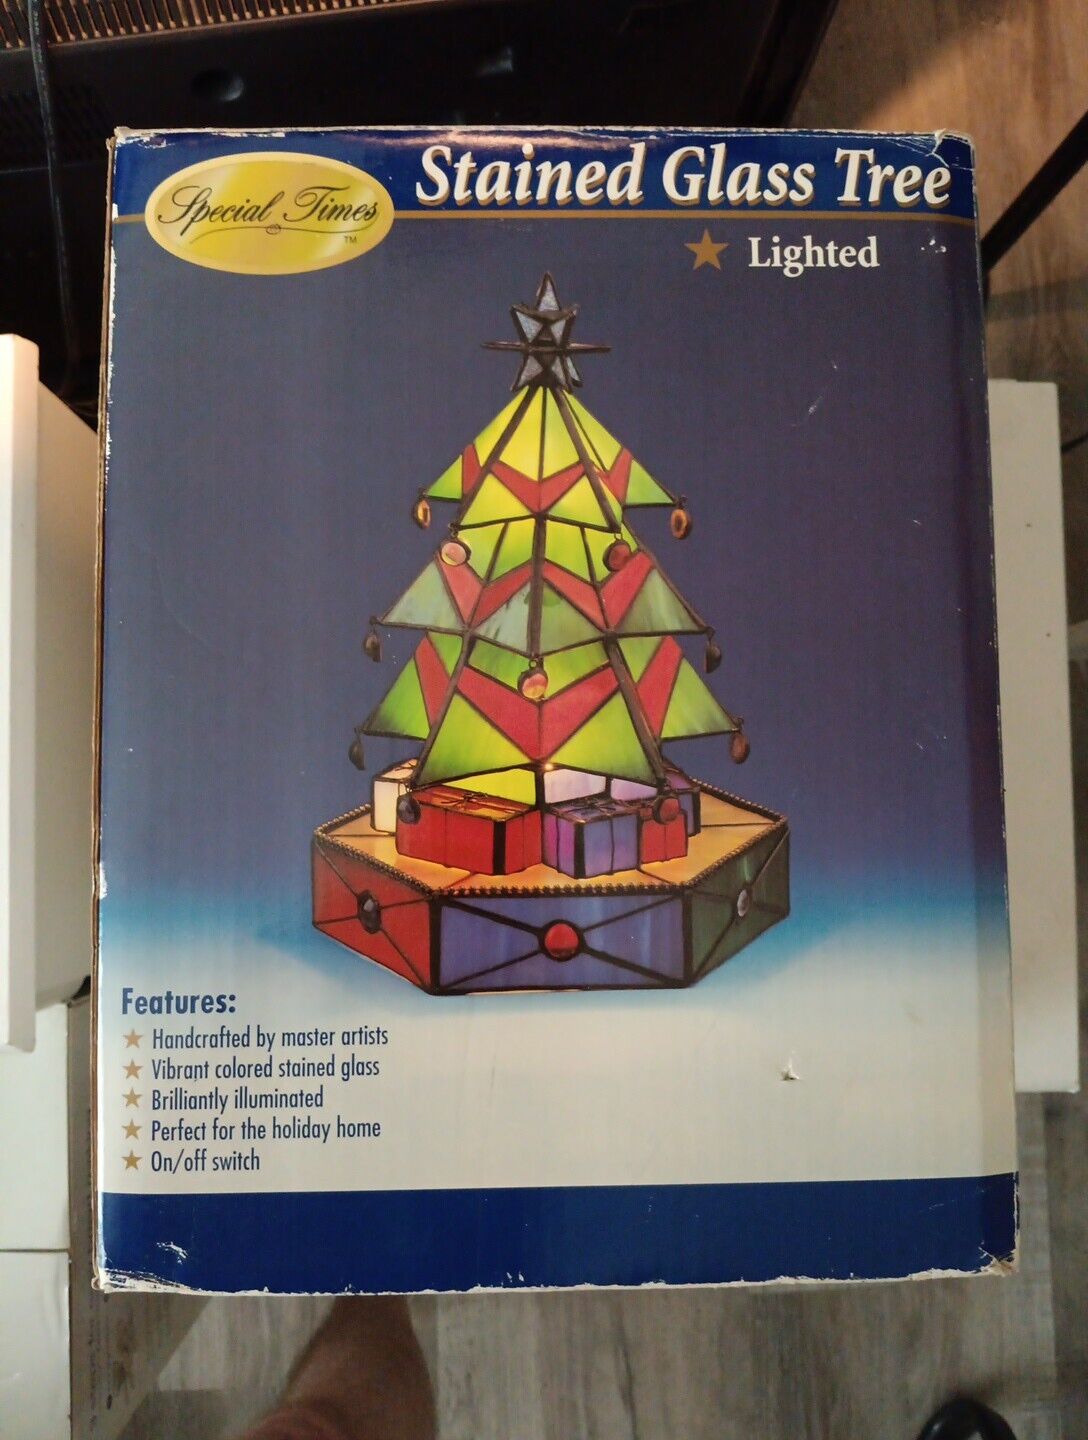 Special Times Genuine Stained Glass Lighted Christmas Tree Vintage Collector NEW